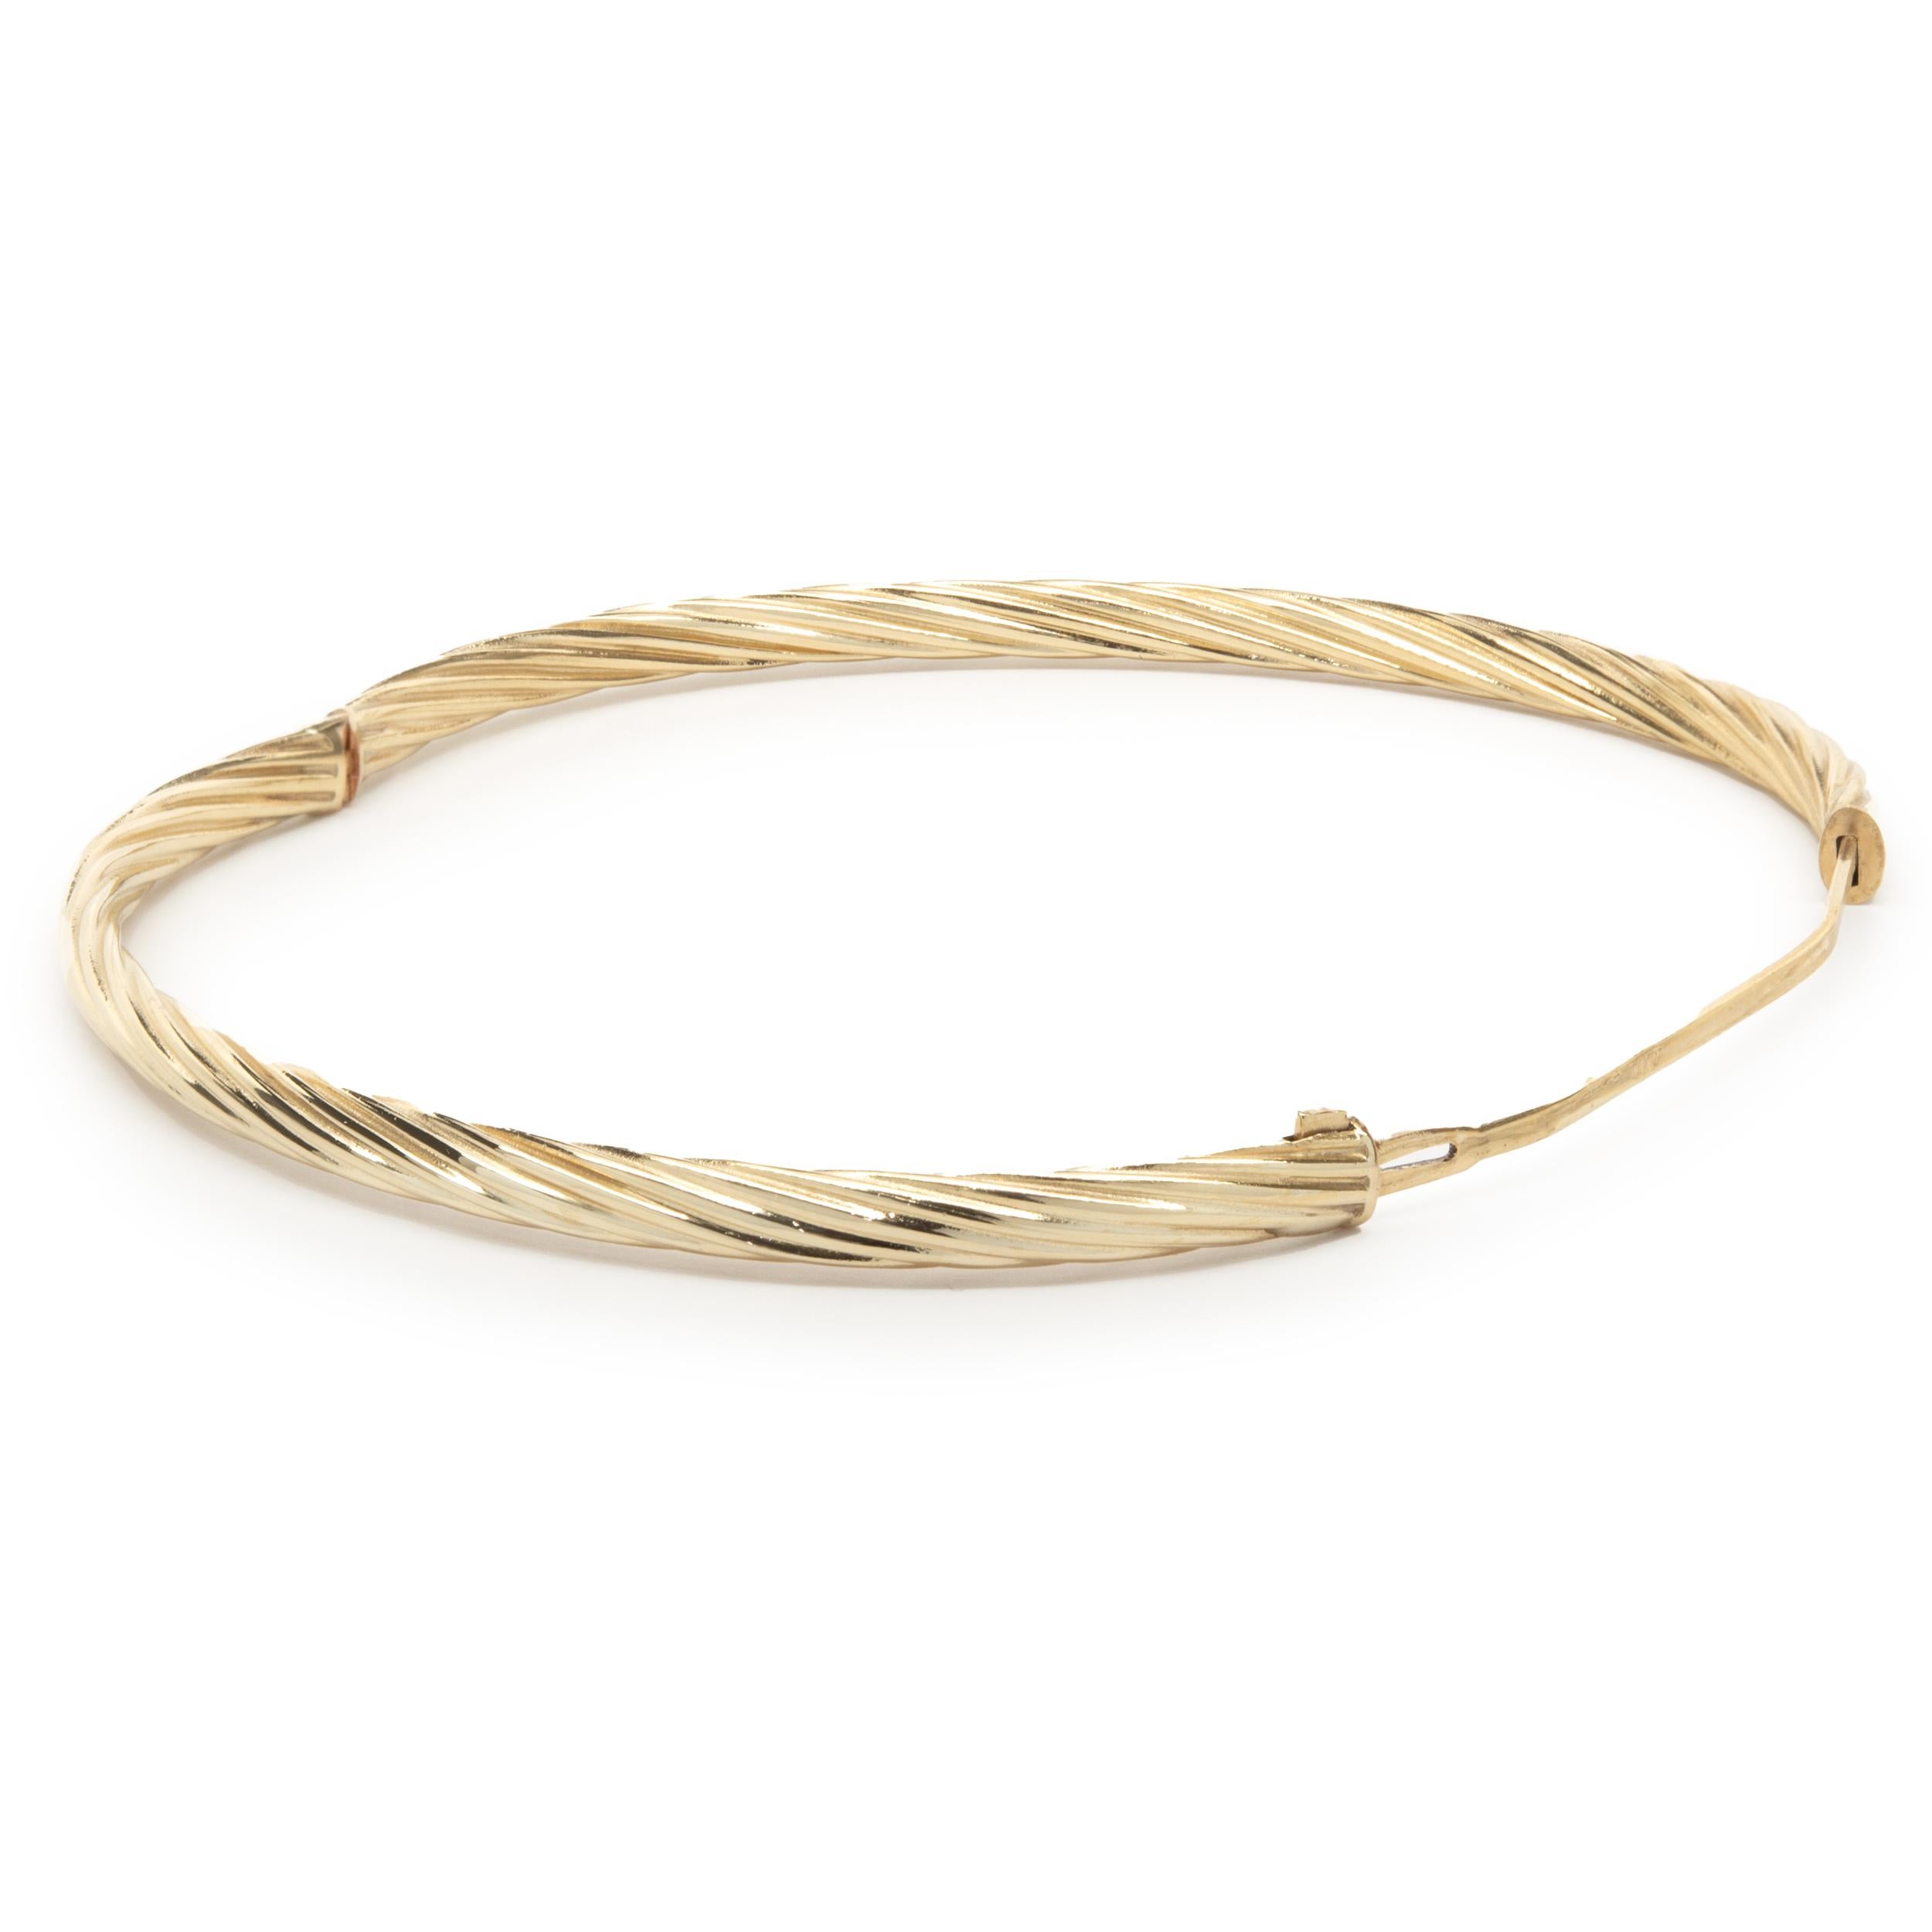 Material: 14K yellow gold
Dimensions: bracelet will fit up to an 7-inch wrist
Weight: 5.09 grams
